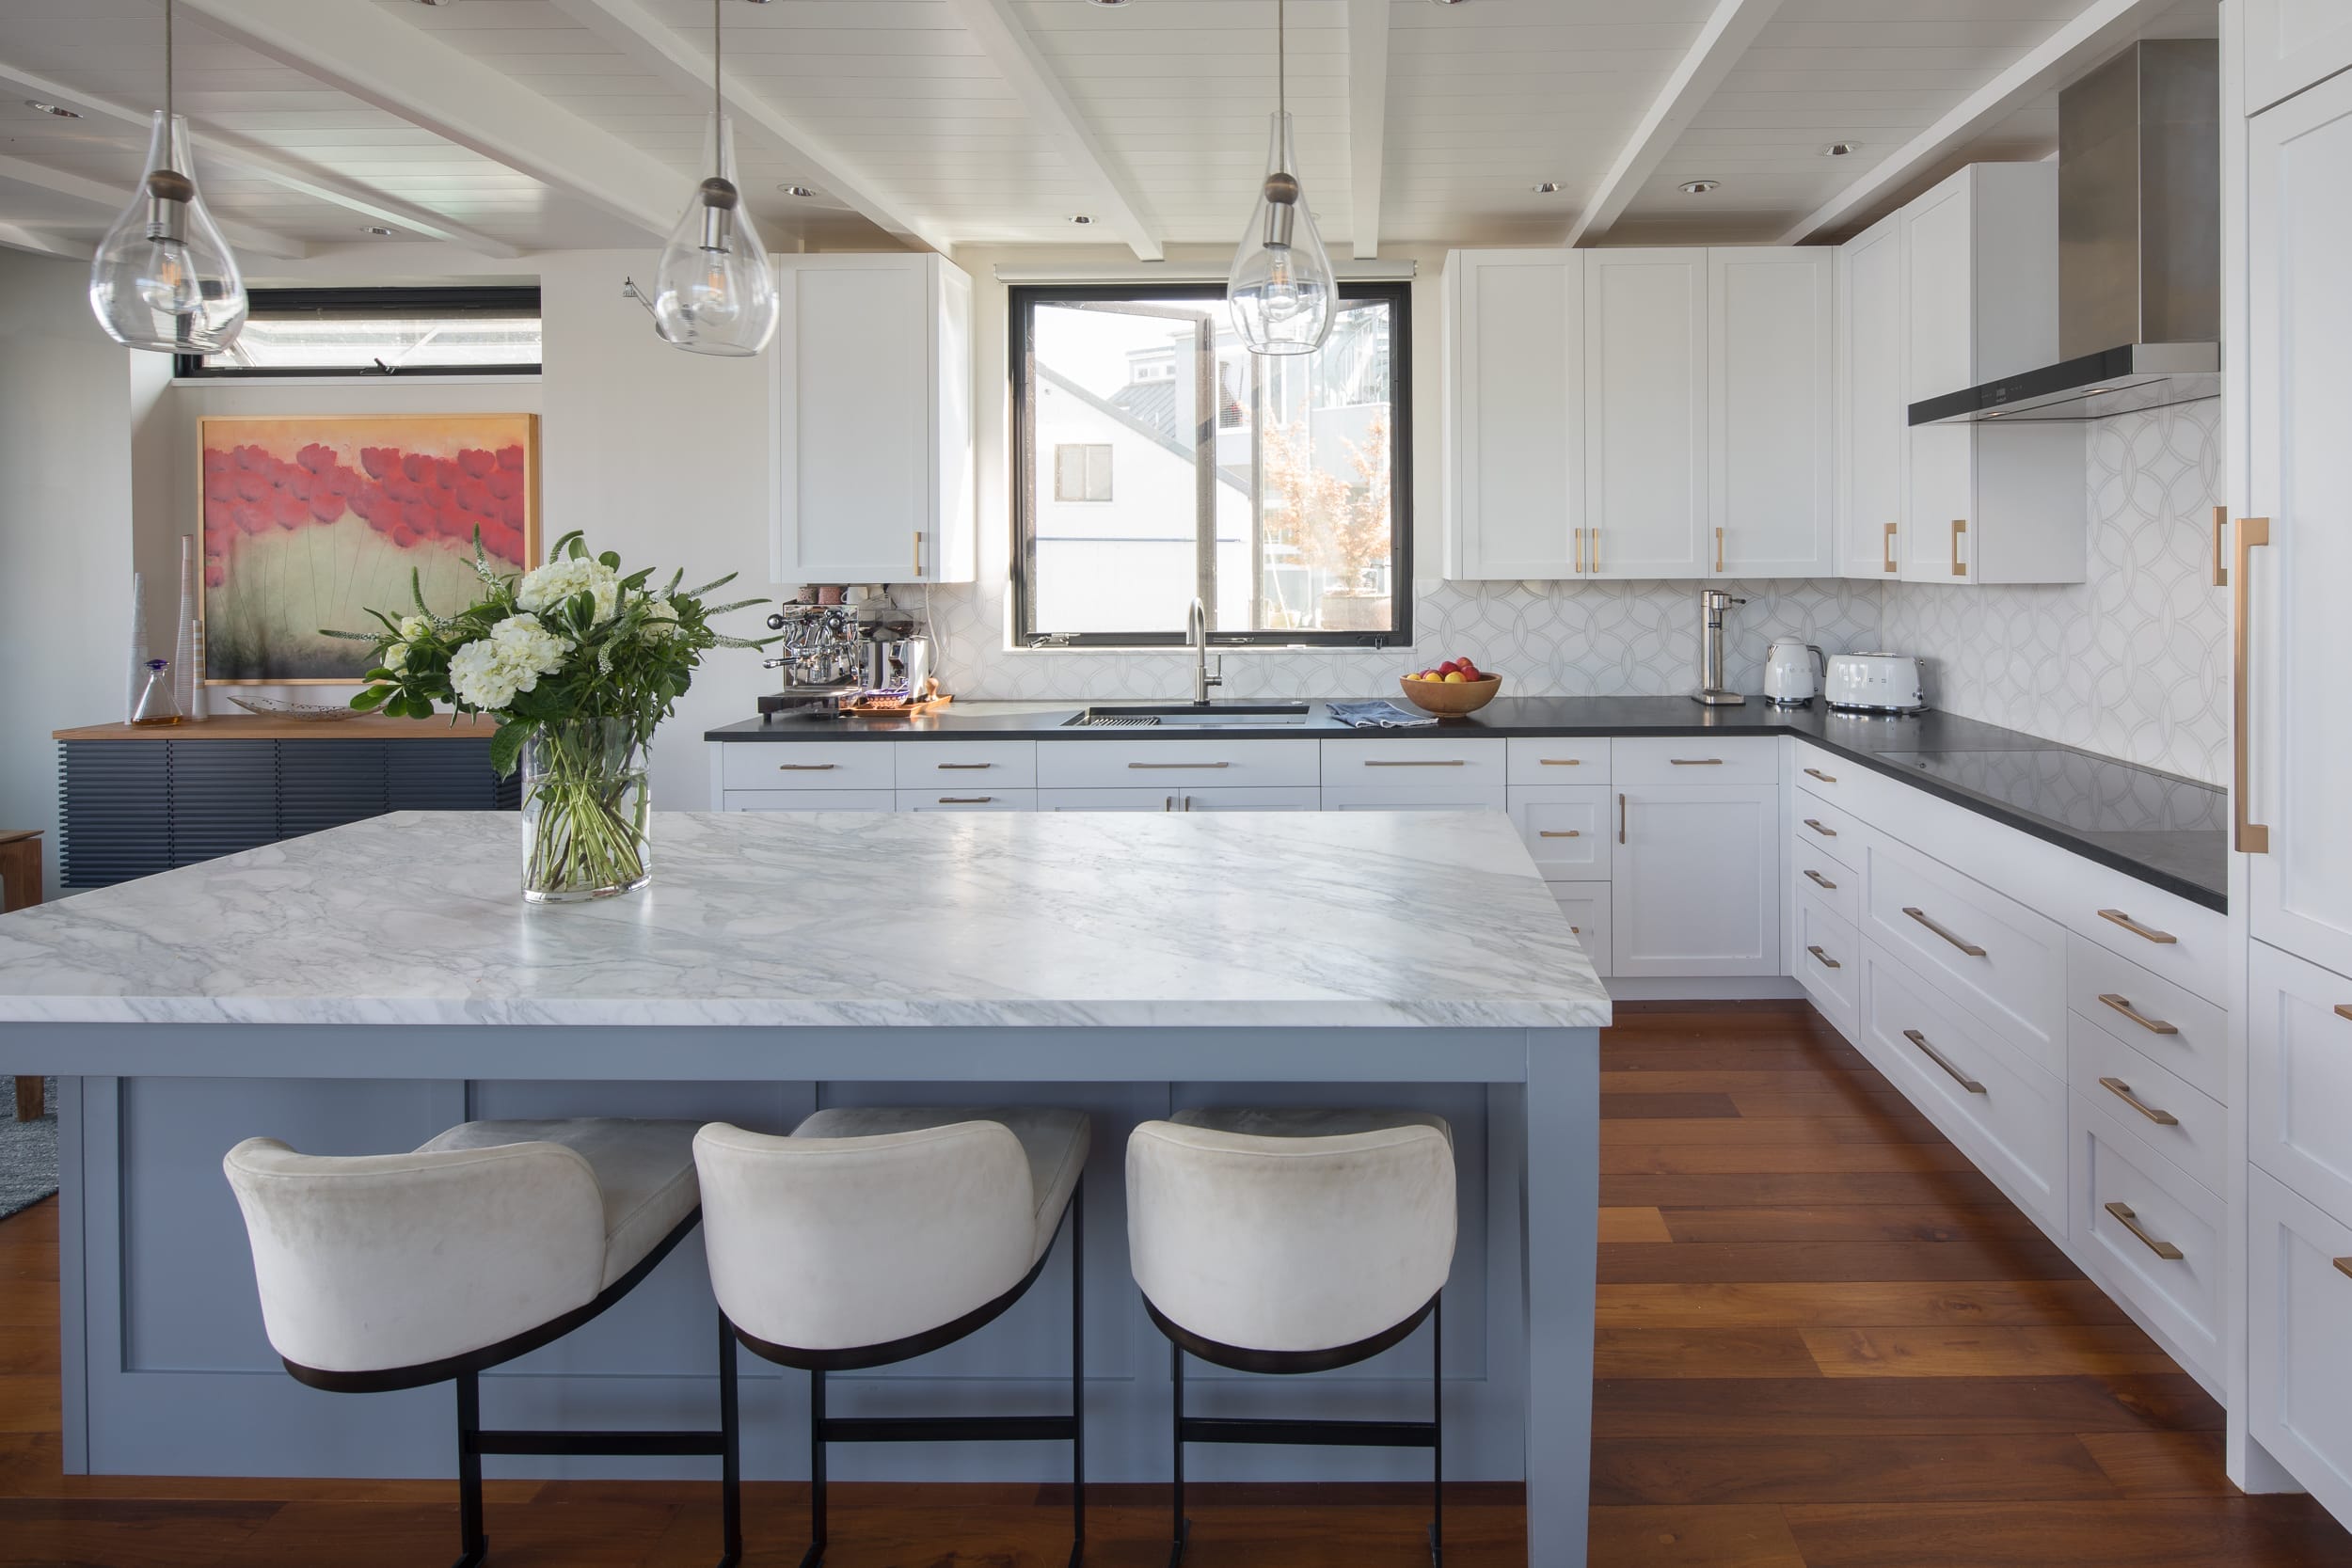 A modern white kitchen with marble counter tops and stools, perfect for a floating home.